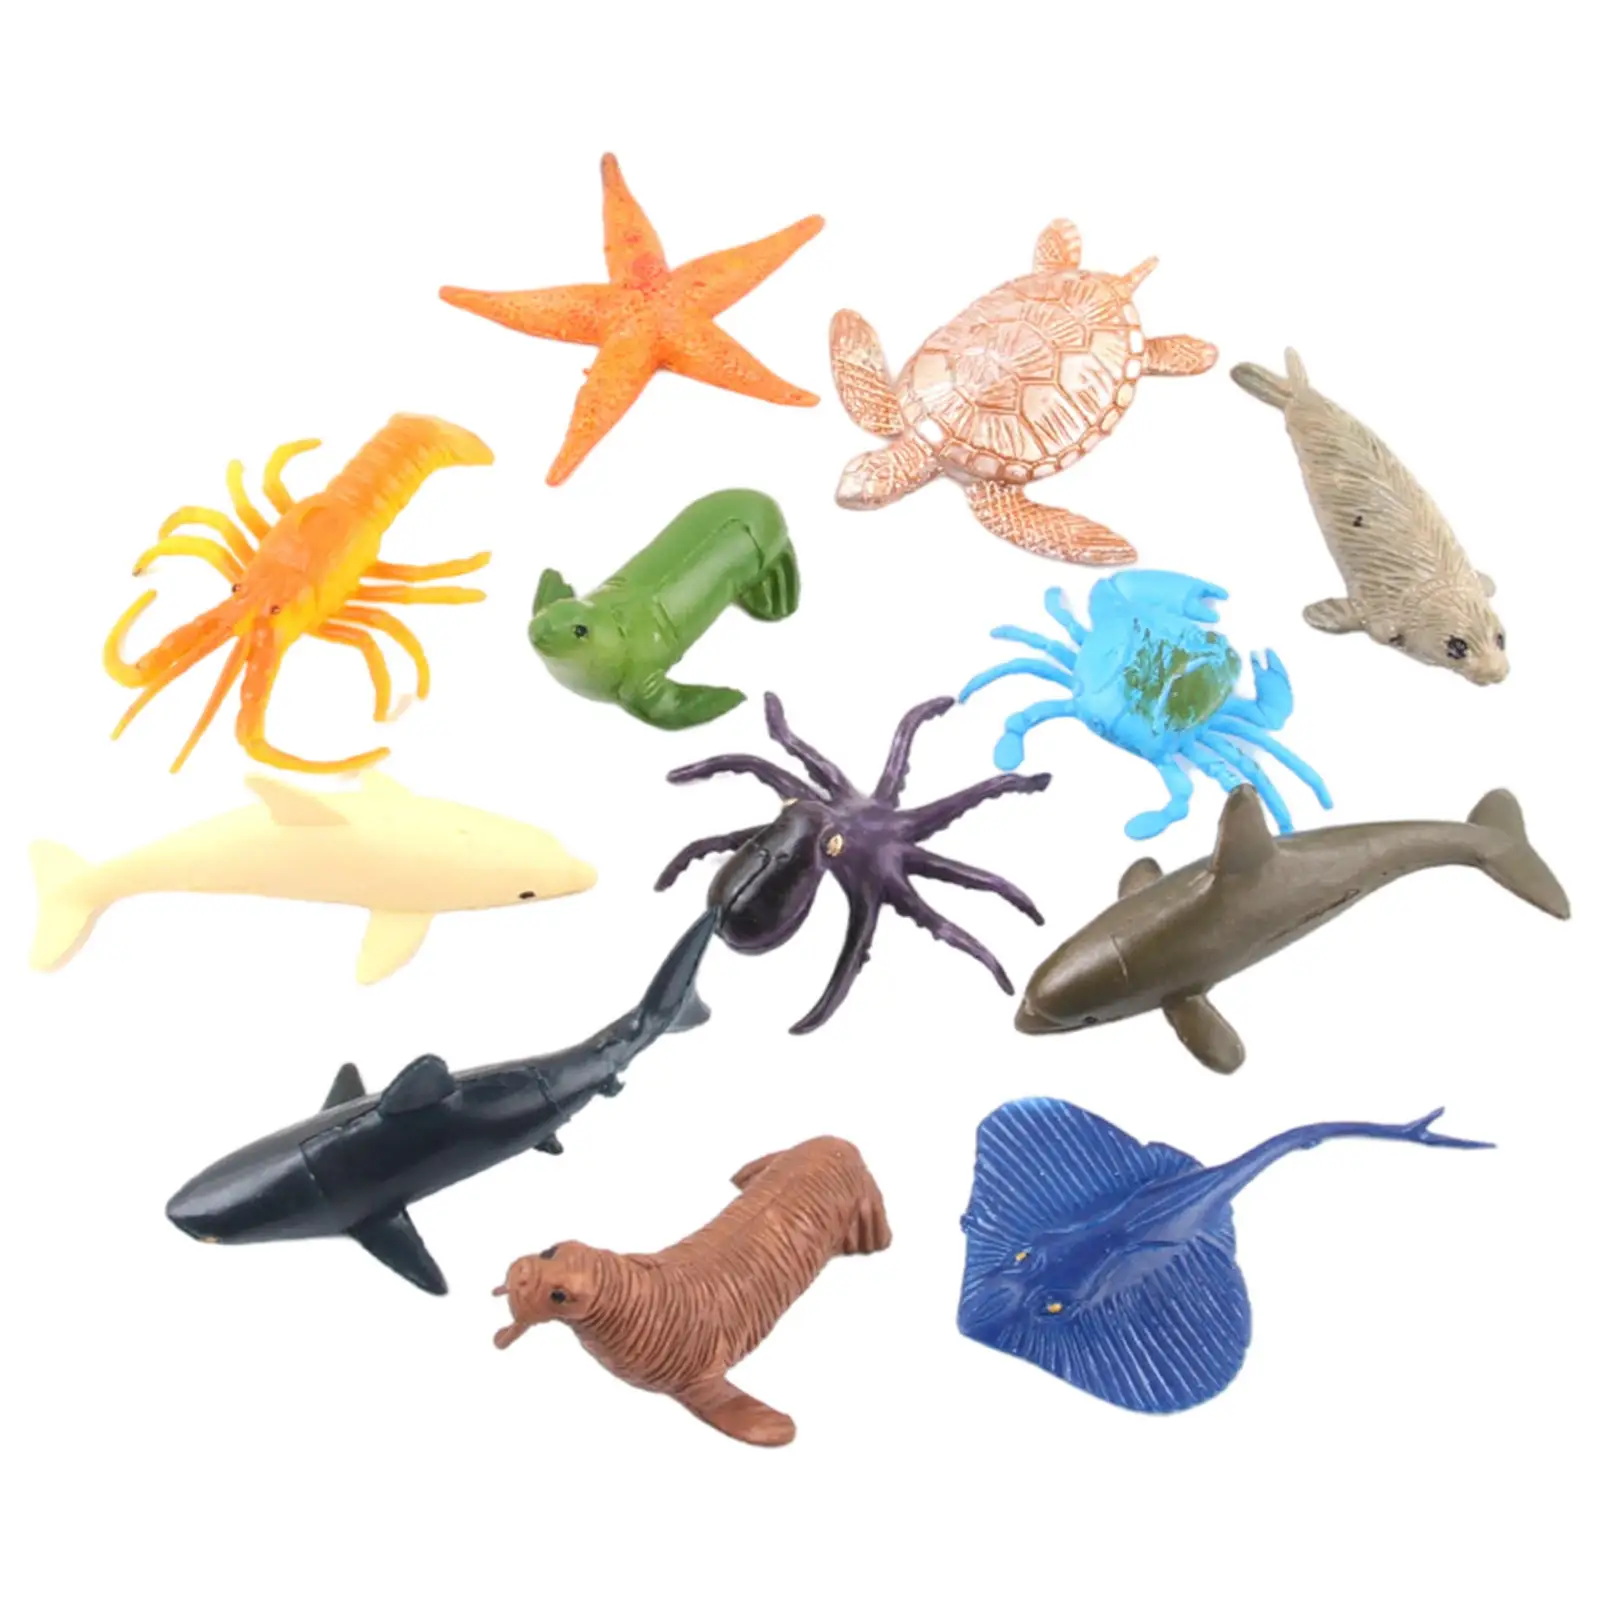 12Piece Marine Life Model Tiny Lifelike Small Size for School Collection